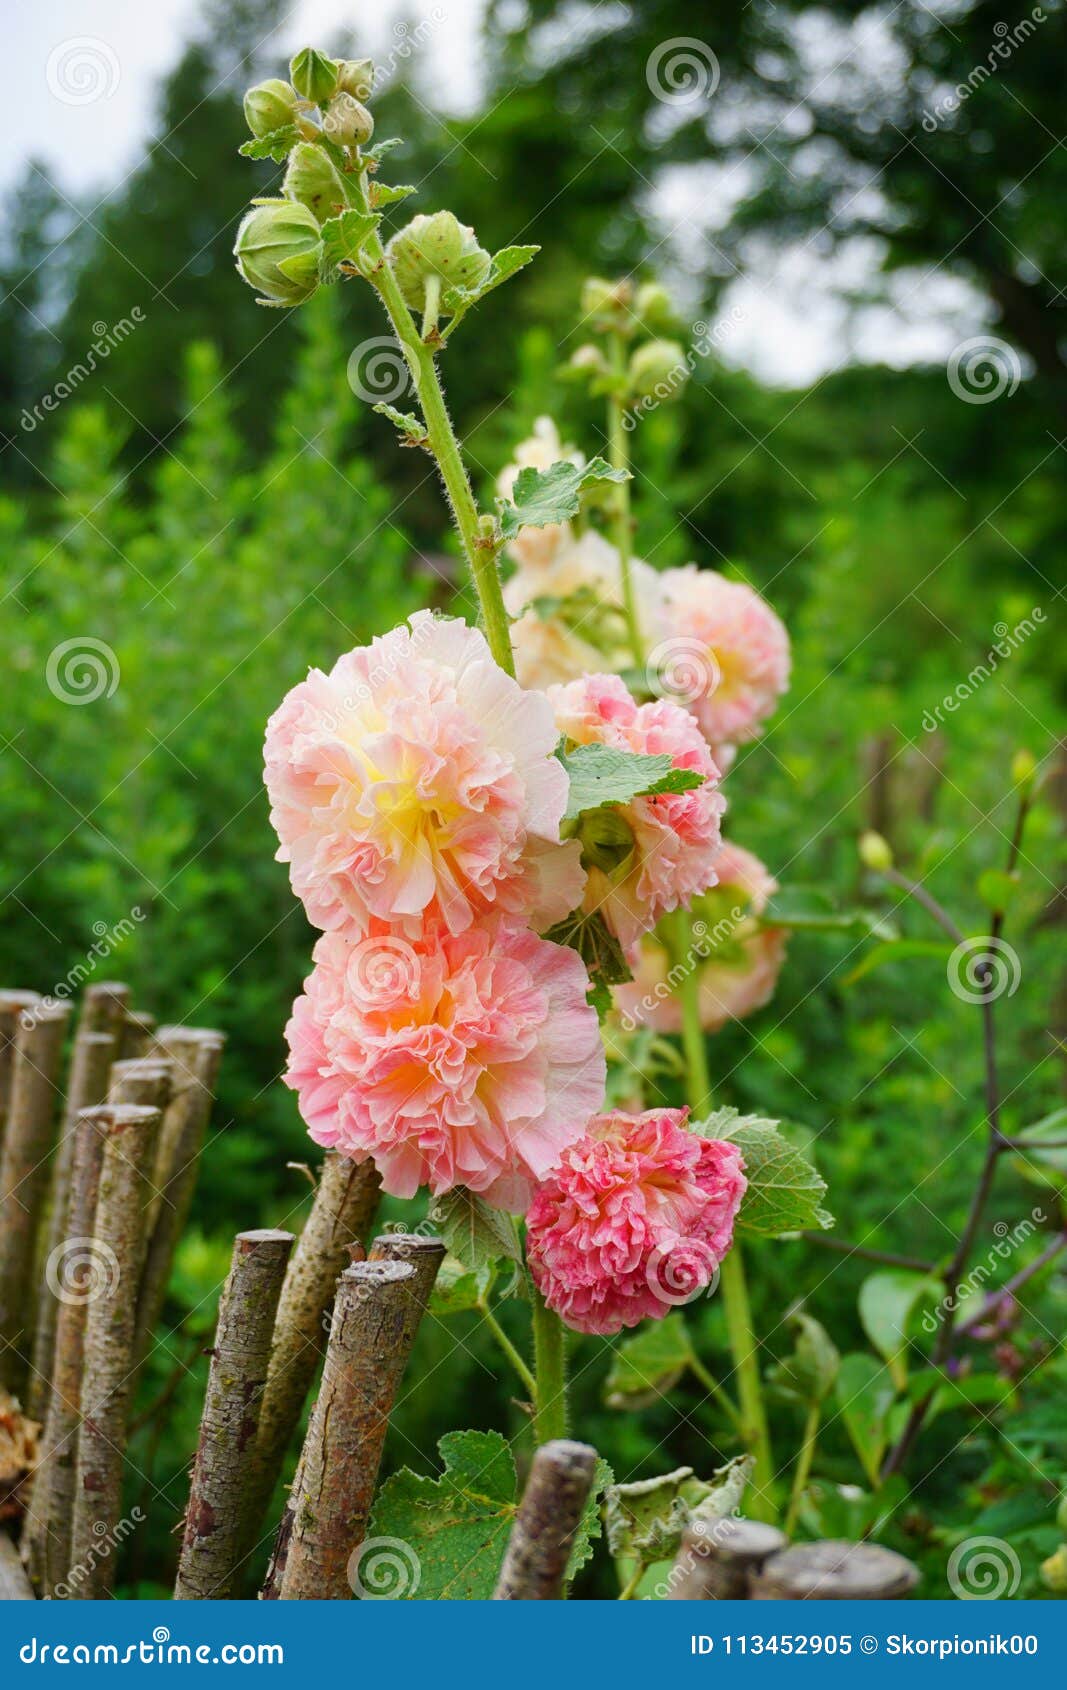 The Beauty of Decorative Mallow Flower in Garden -Hollyhock Charter`s  Double, Alcea Rosea Stock Image - Image of bright, floral: 113452905